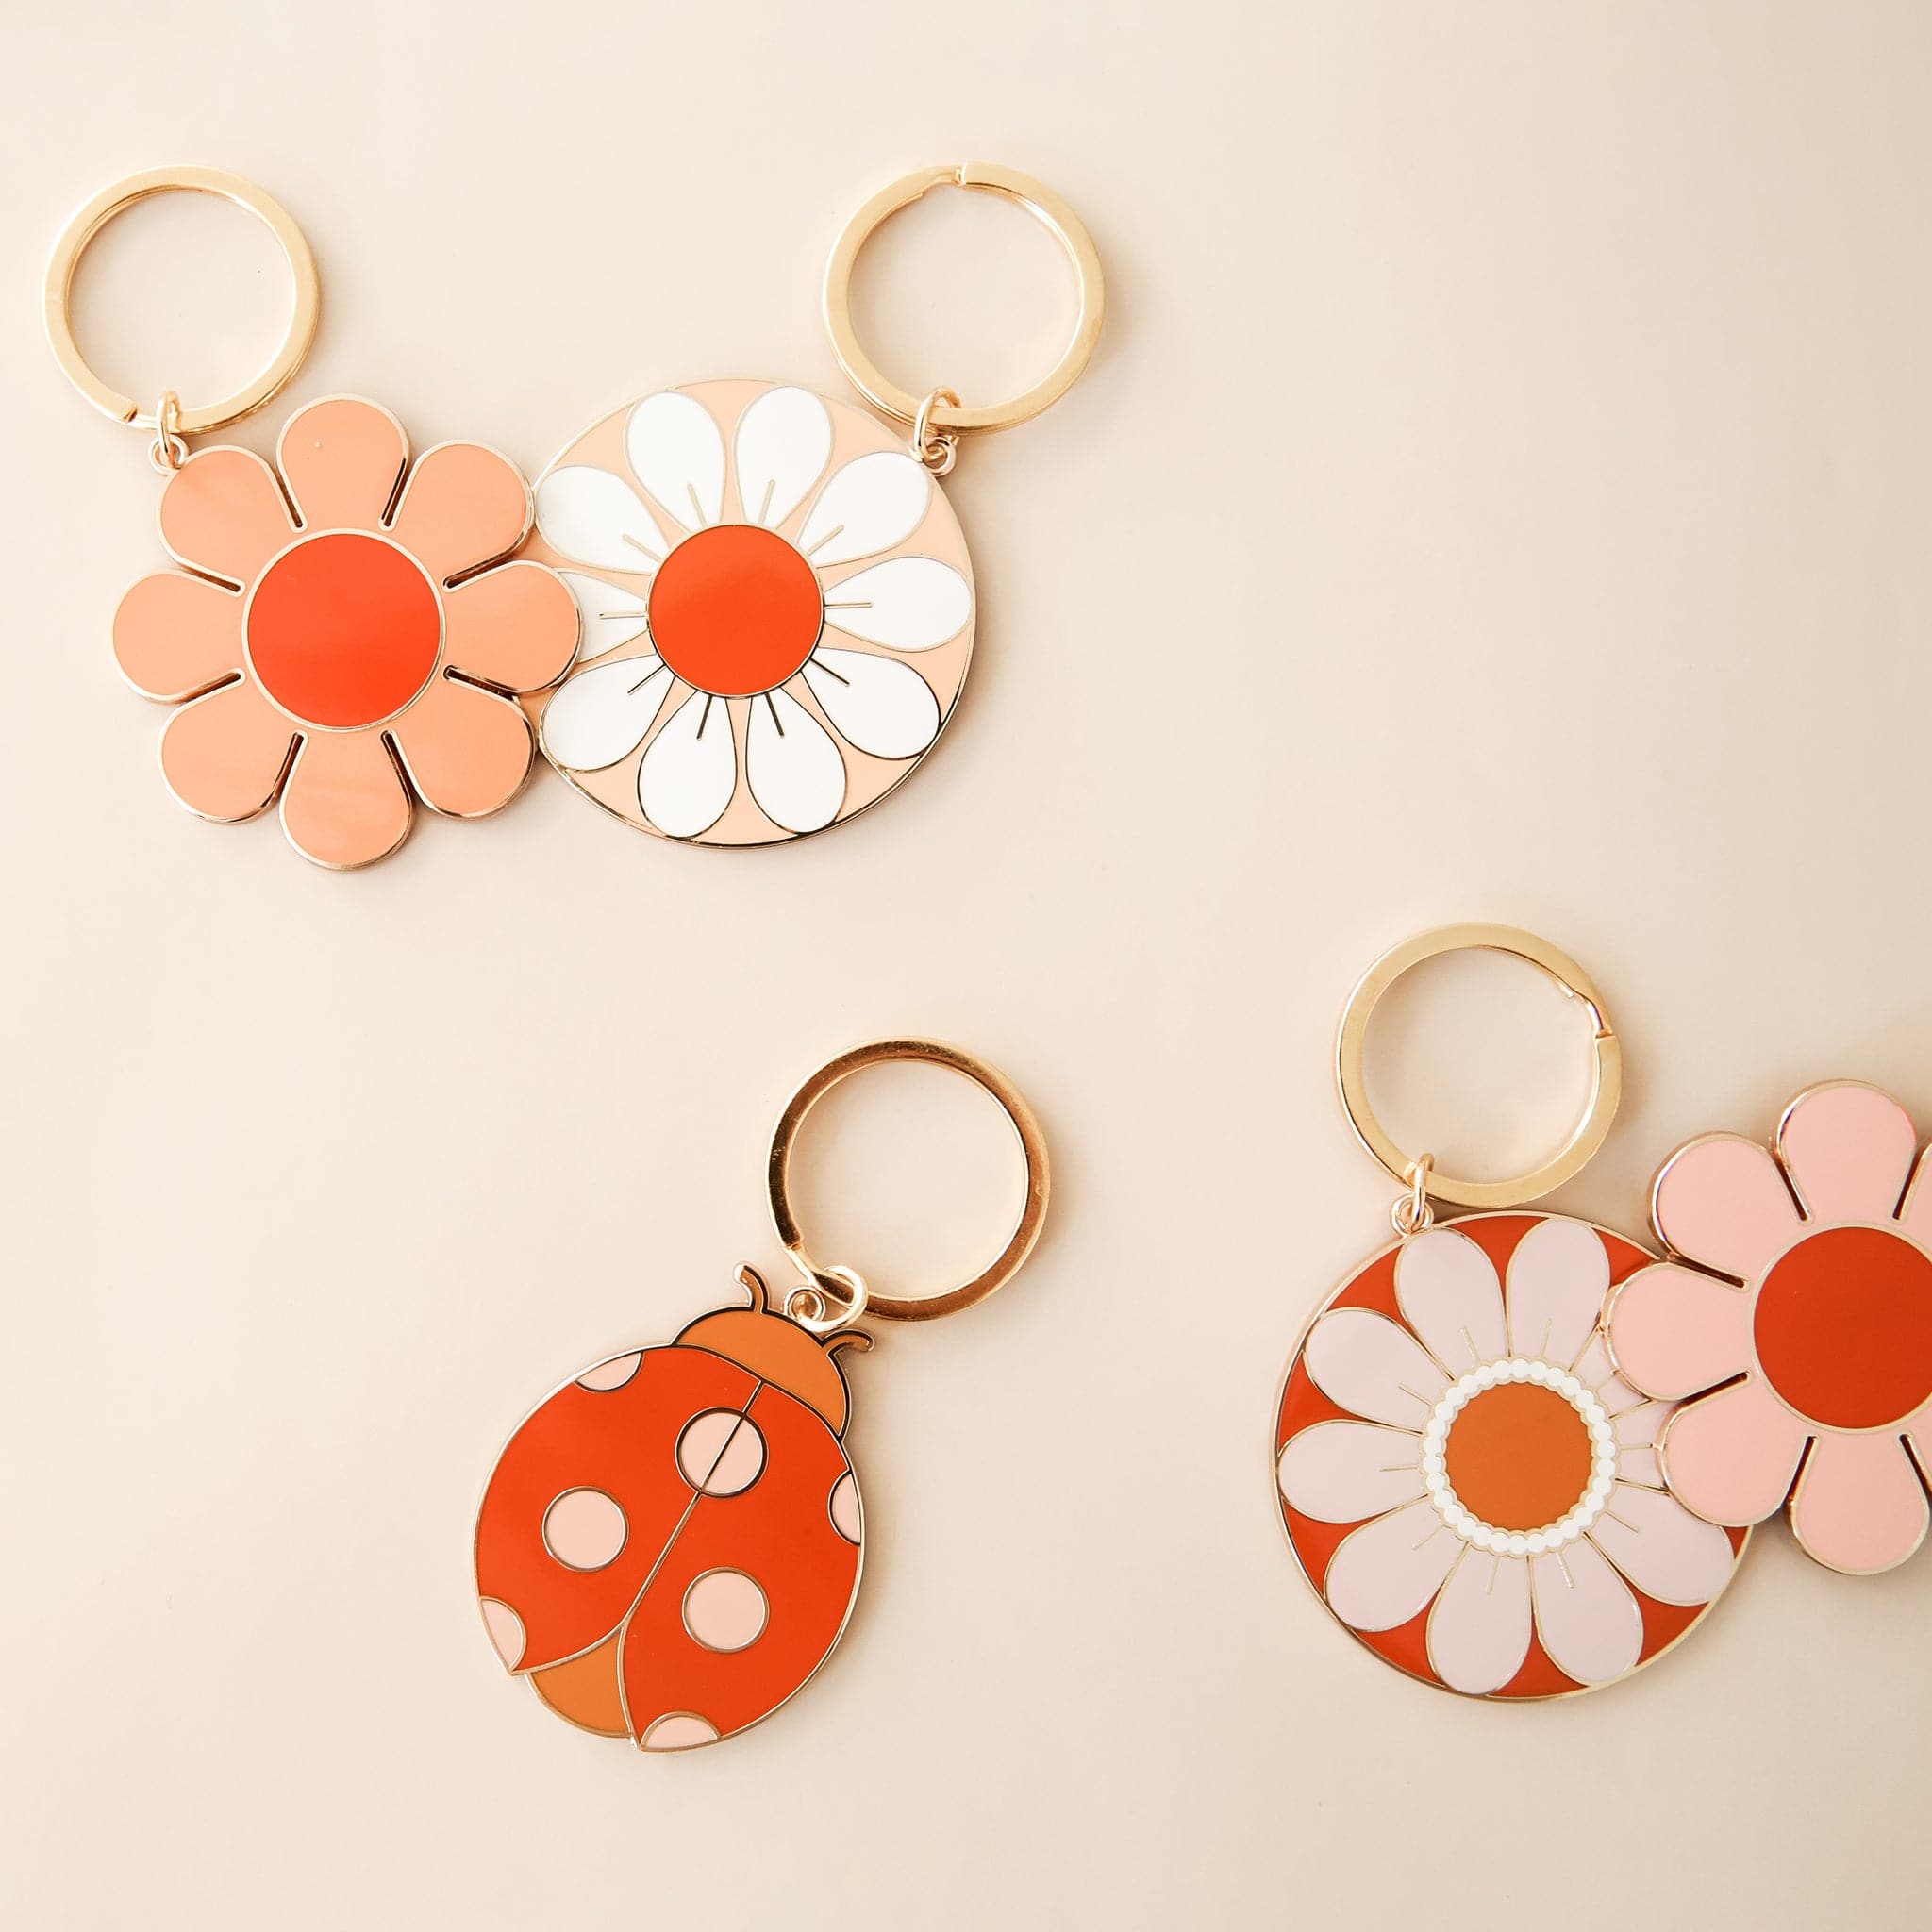 Five retro-inspired keychains including a variety of flowers and a ladybug. 